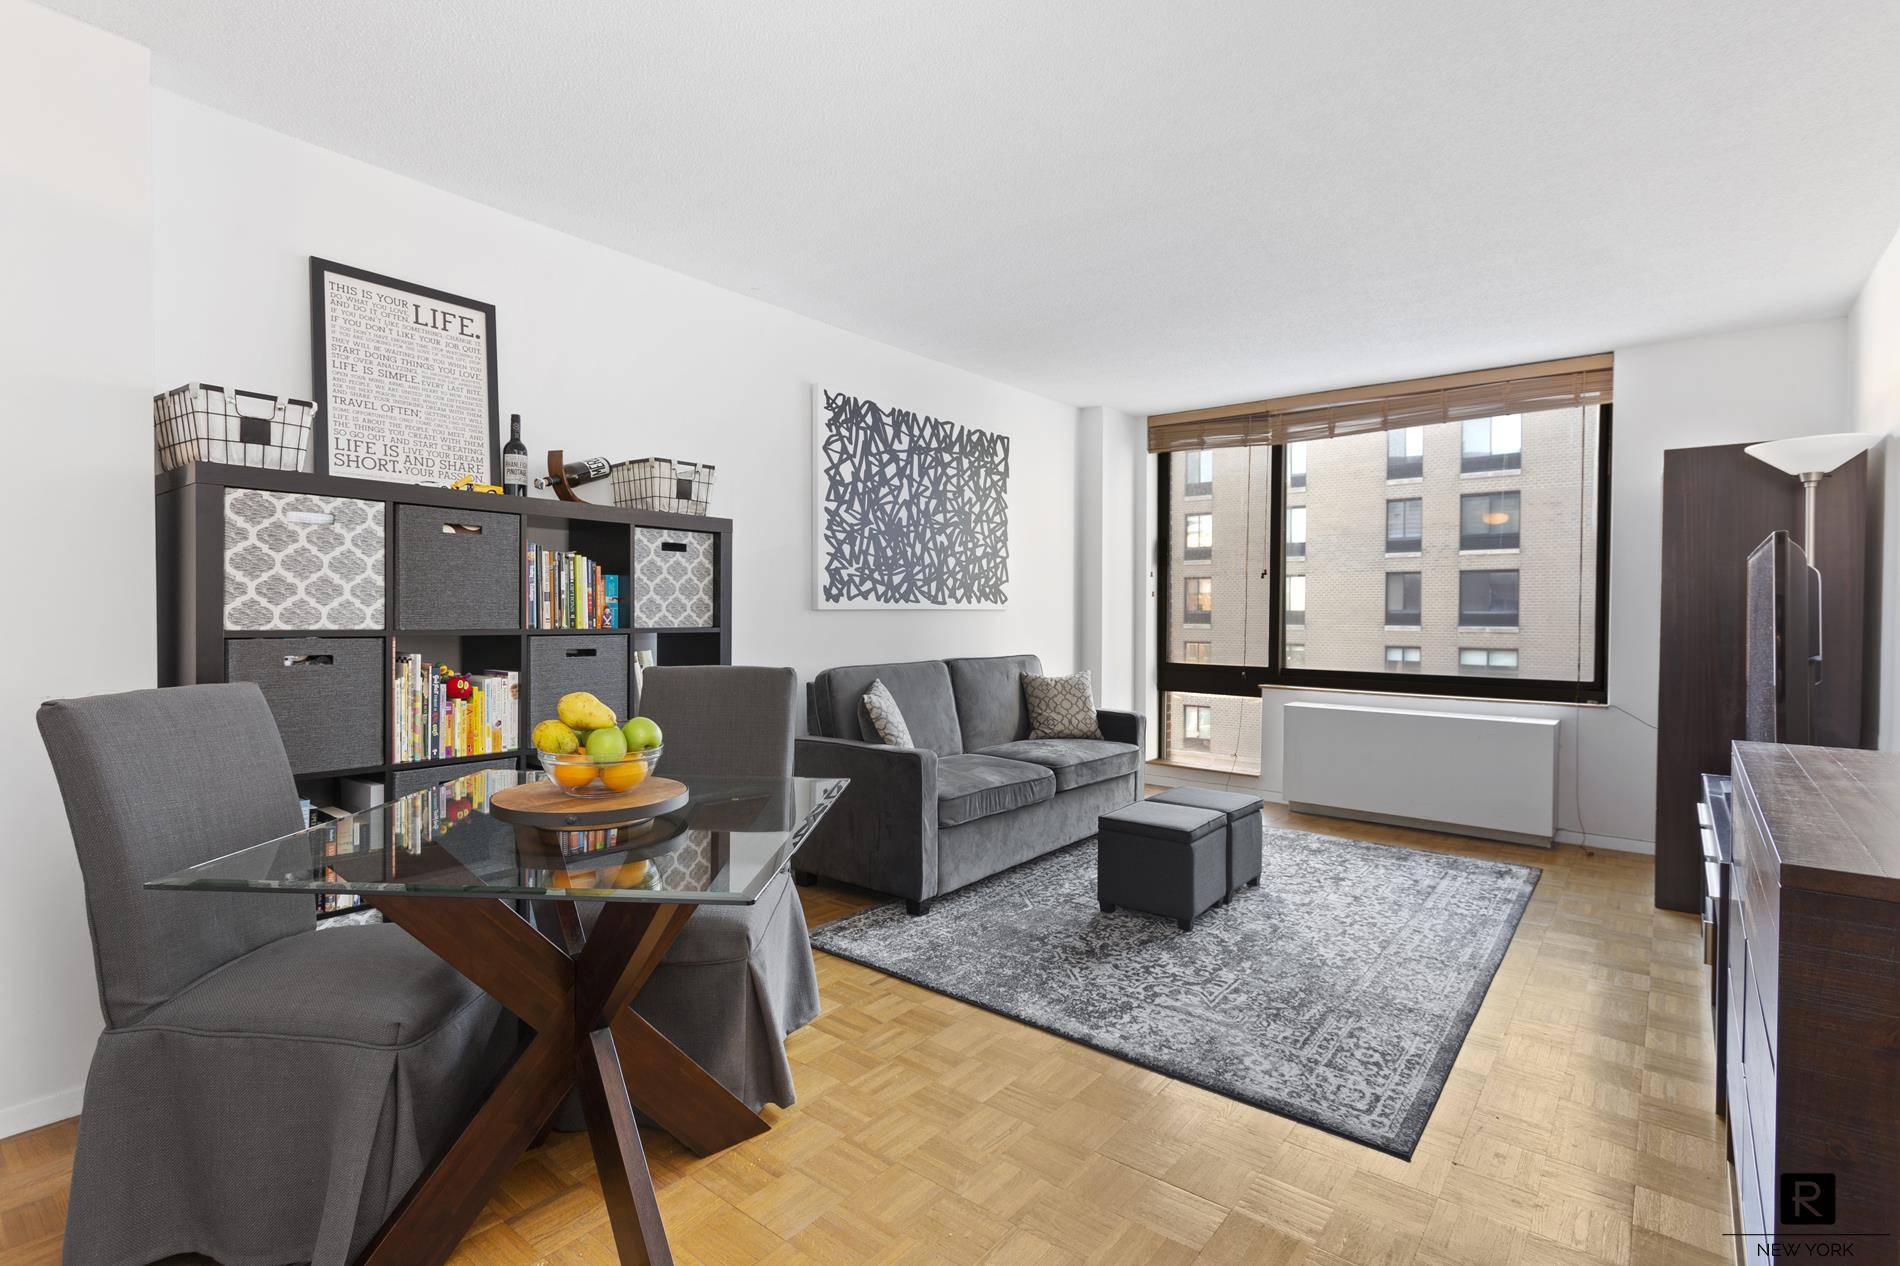 VALUE BUYERS We are pleased to present one of the least expensive, largest true one bedrooms in a full service condominium in all of Battery Park and Tribeca.